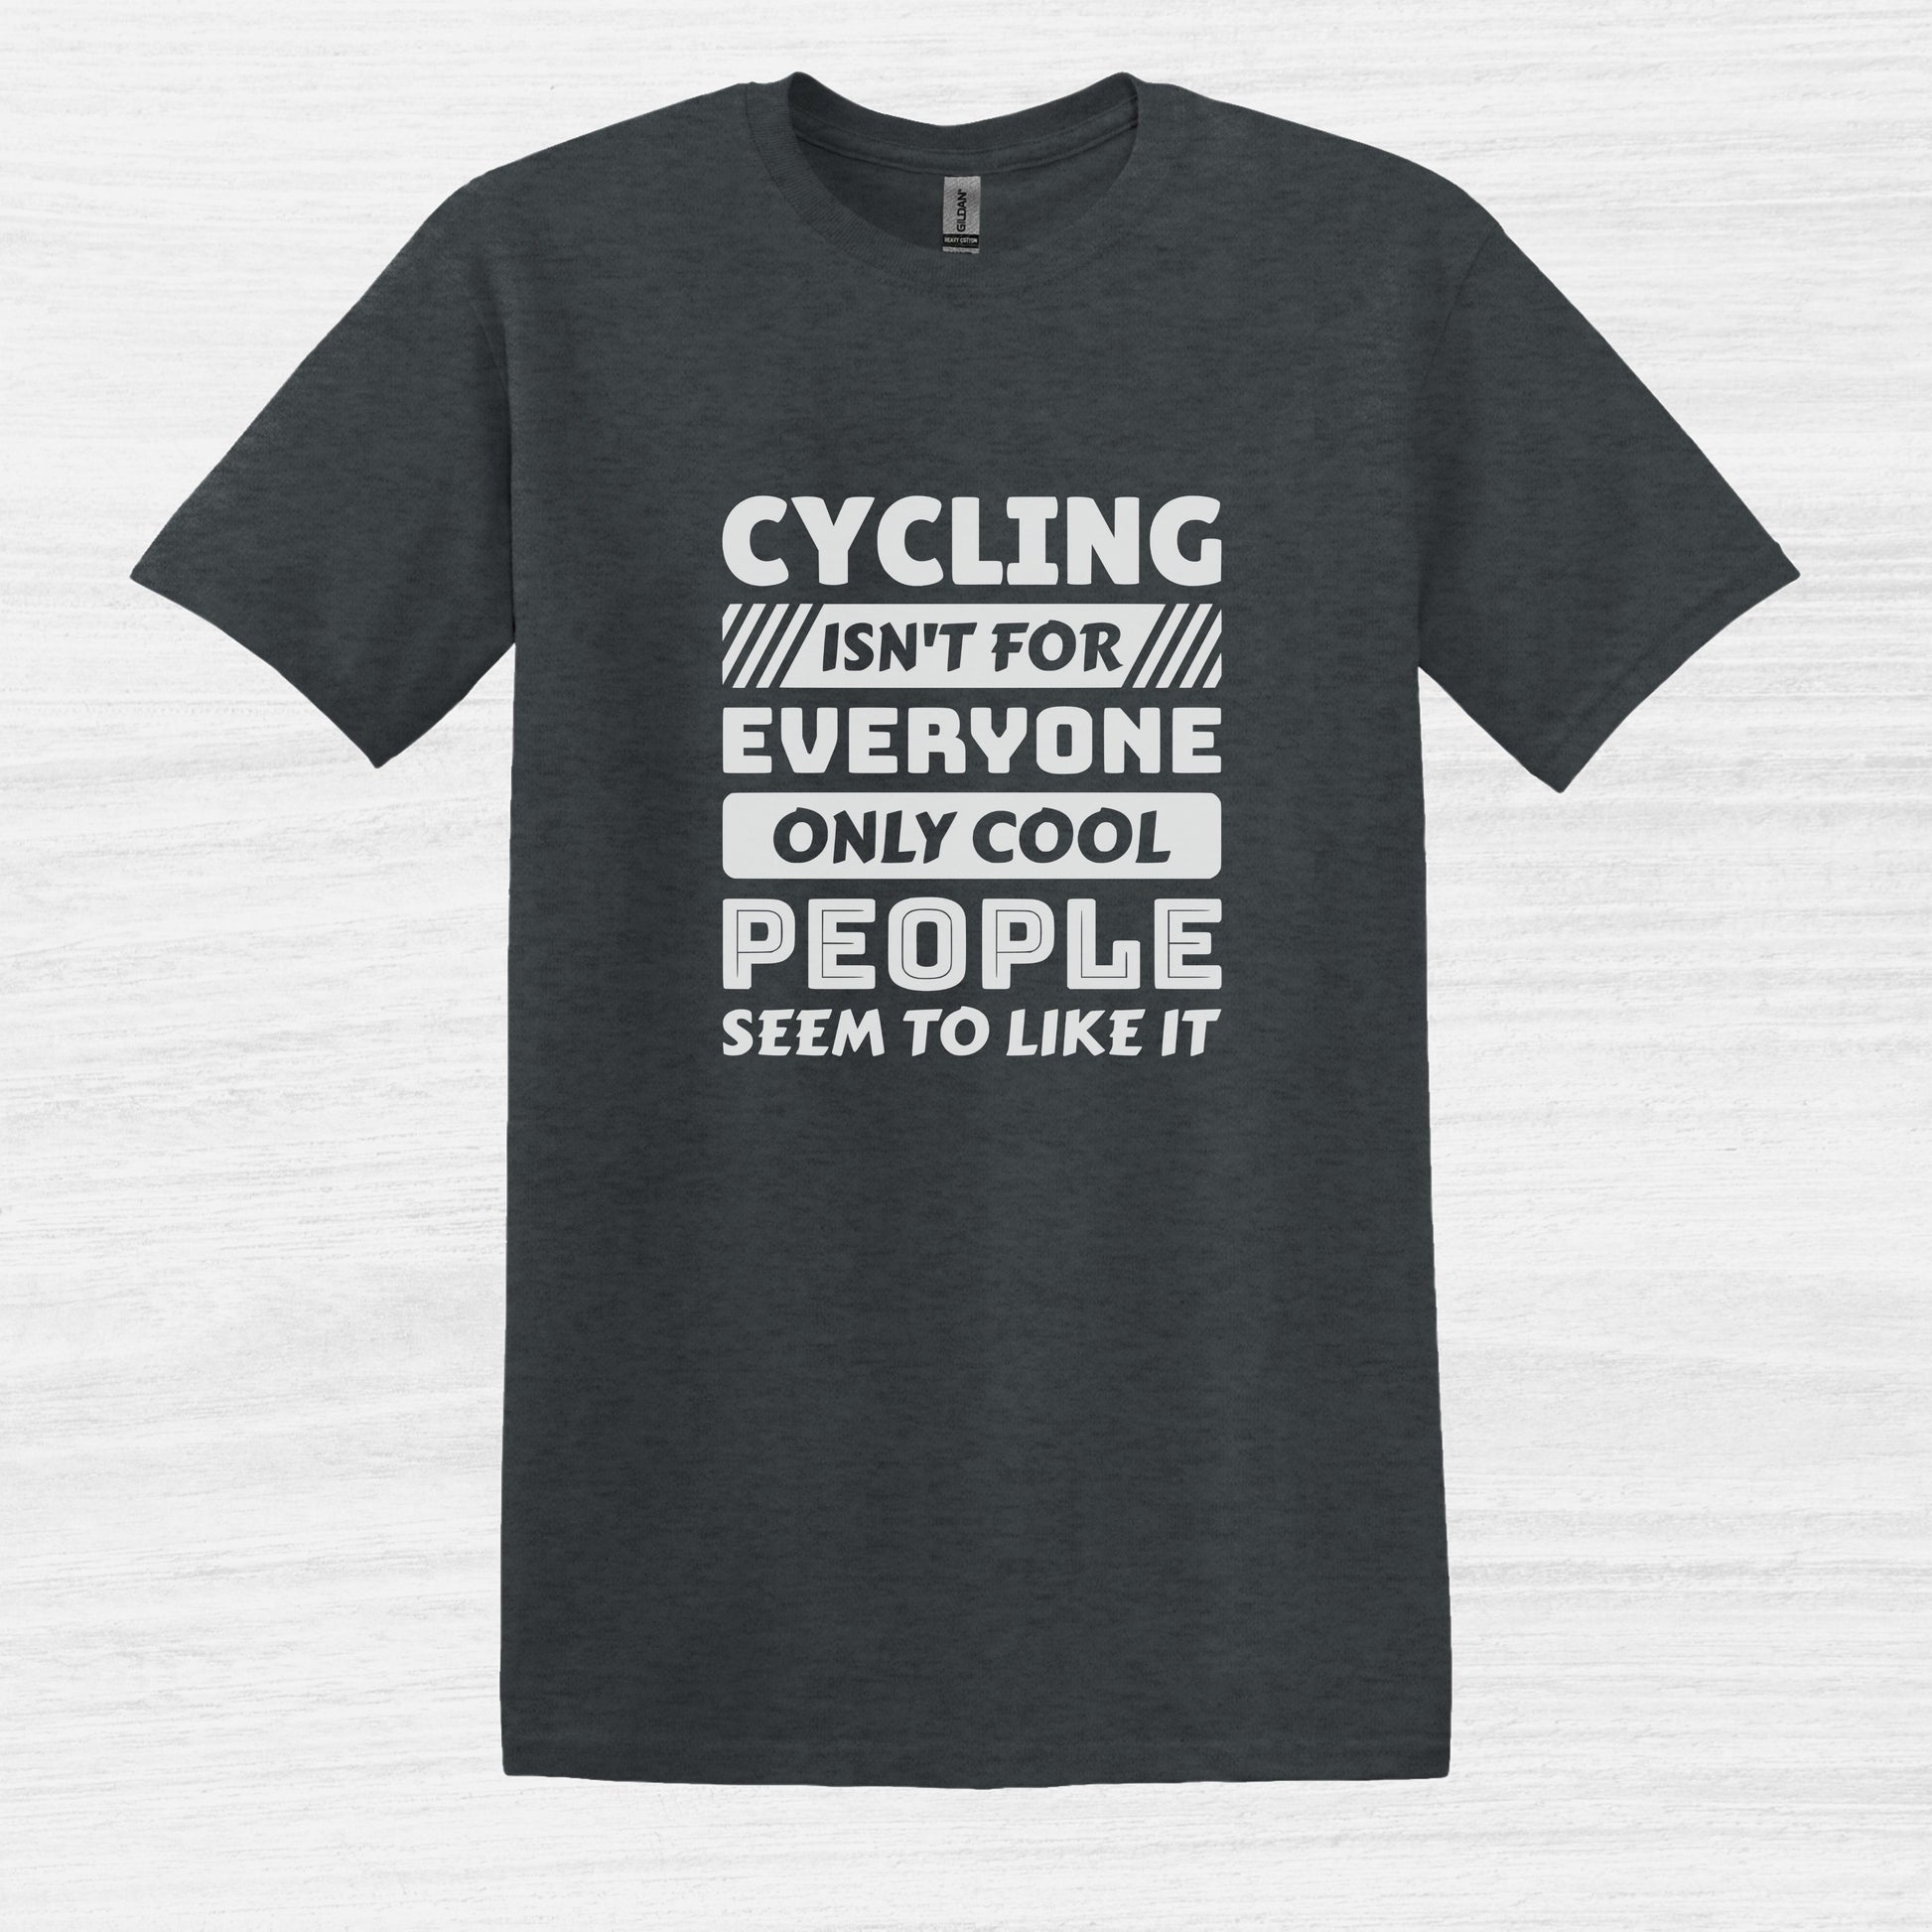 Bike Bliss Cycling isn't for everyone only Cool People seem to like it T-Shirt for Men Dark Heather 2